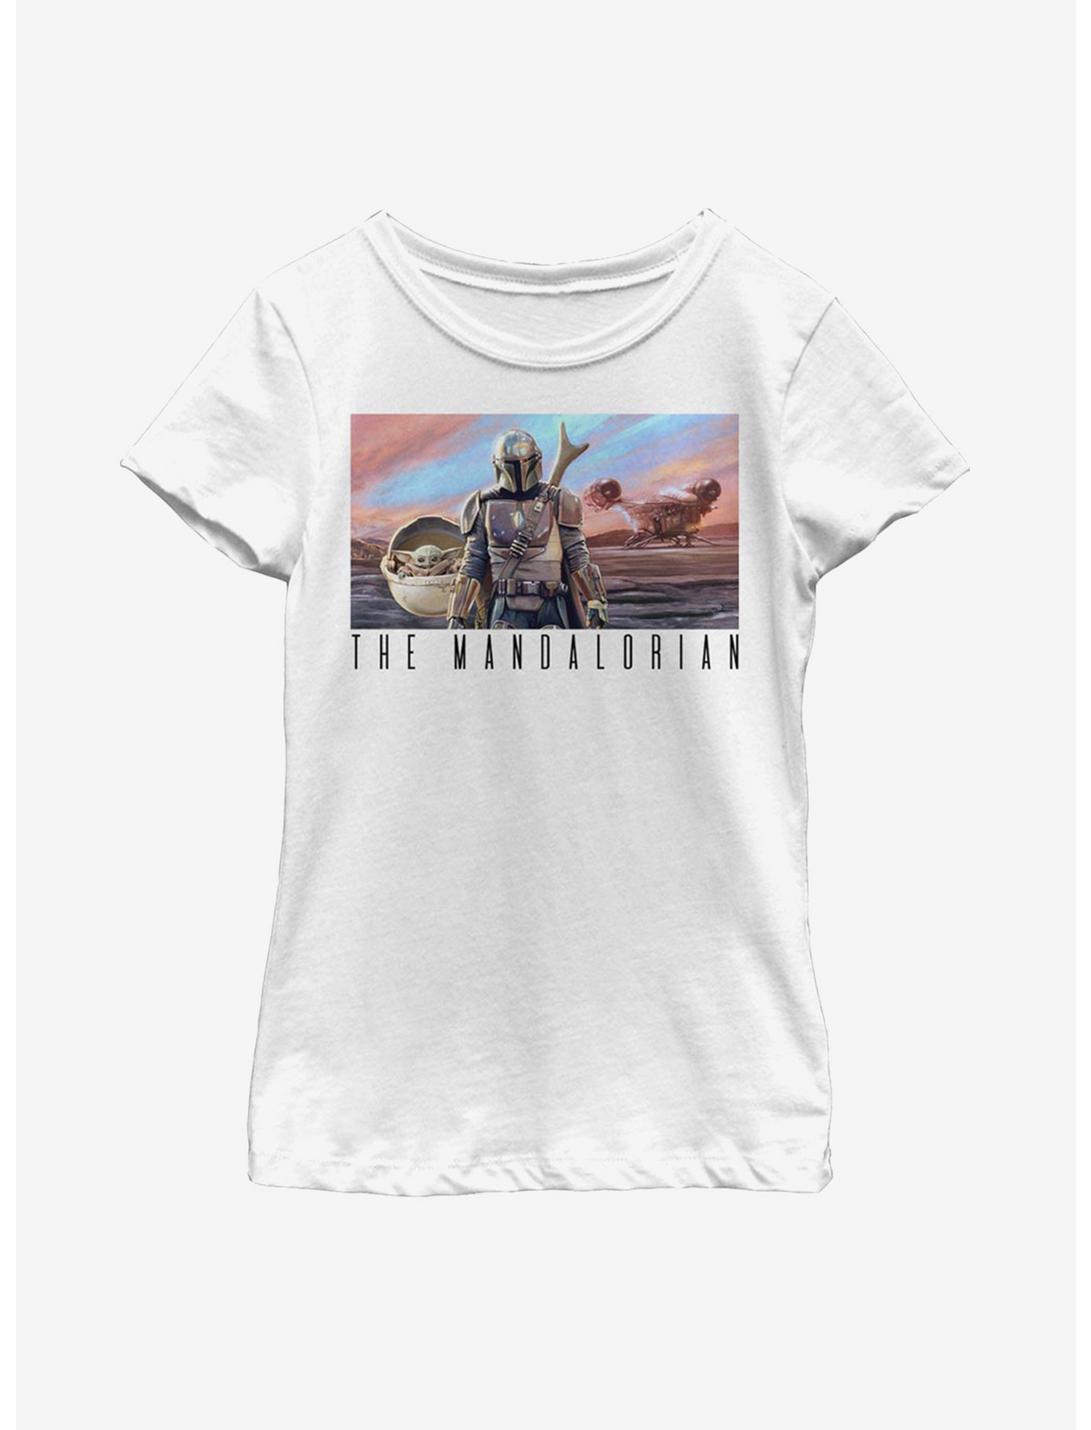 Star Wars The Mandalorian The Child Family Postcard Youth Girls T-Shirt, WHITE, hi-res